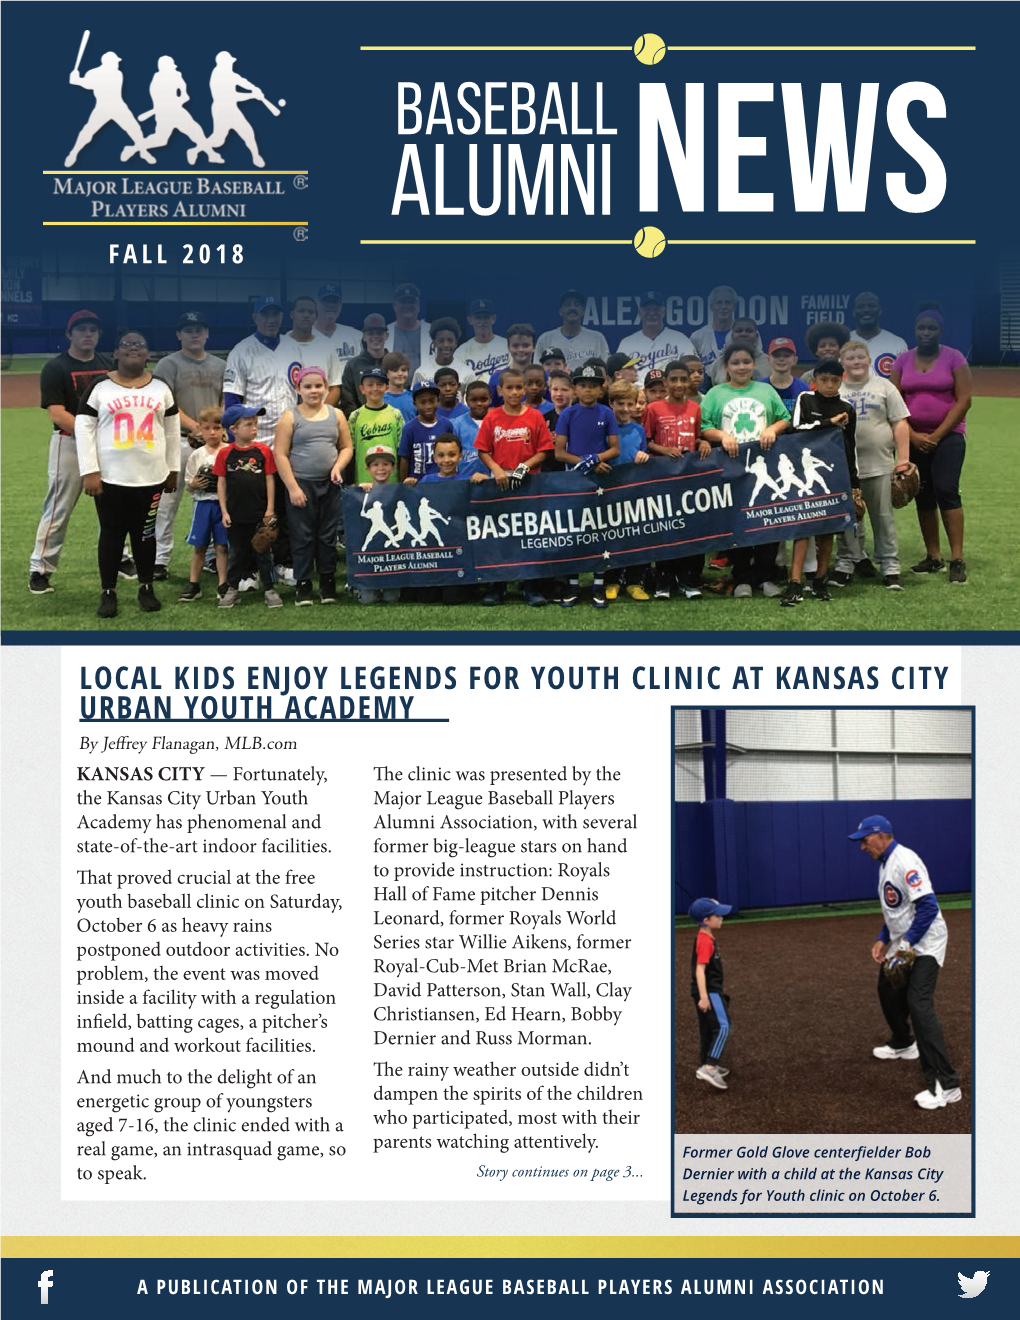 Local Kids Enjoy Legends for Youth Clinic at Kansas City